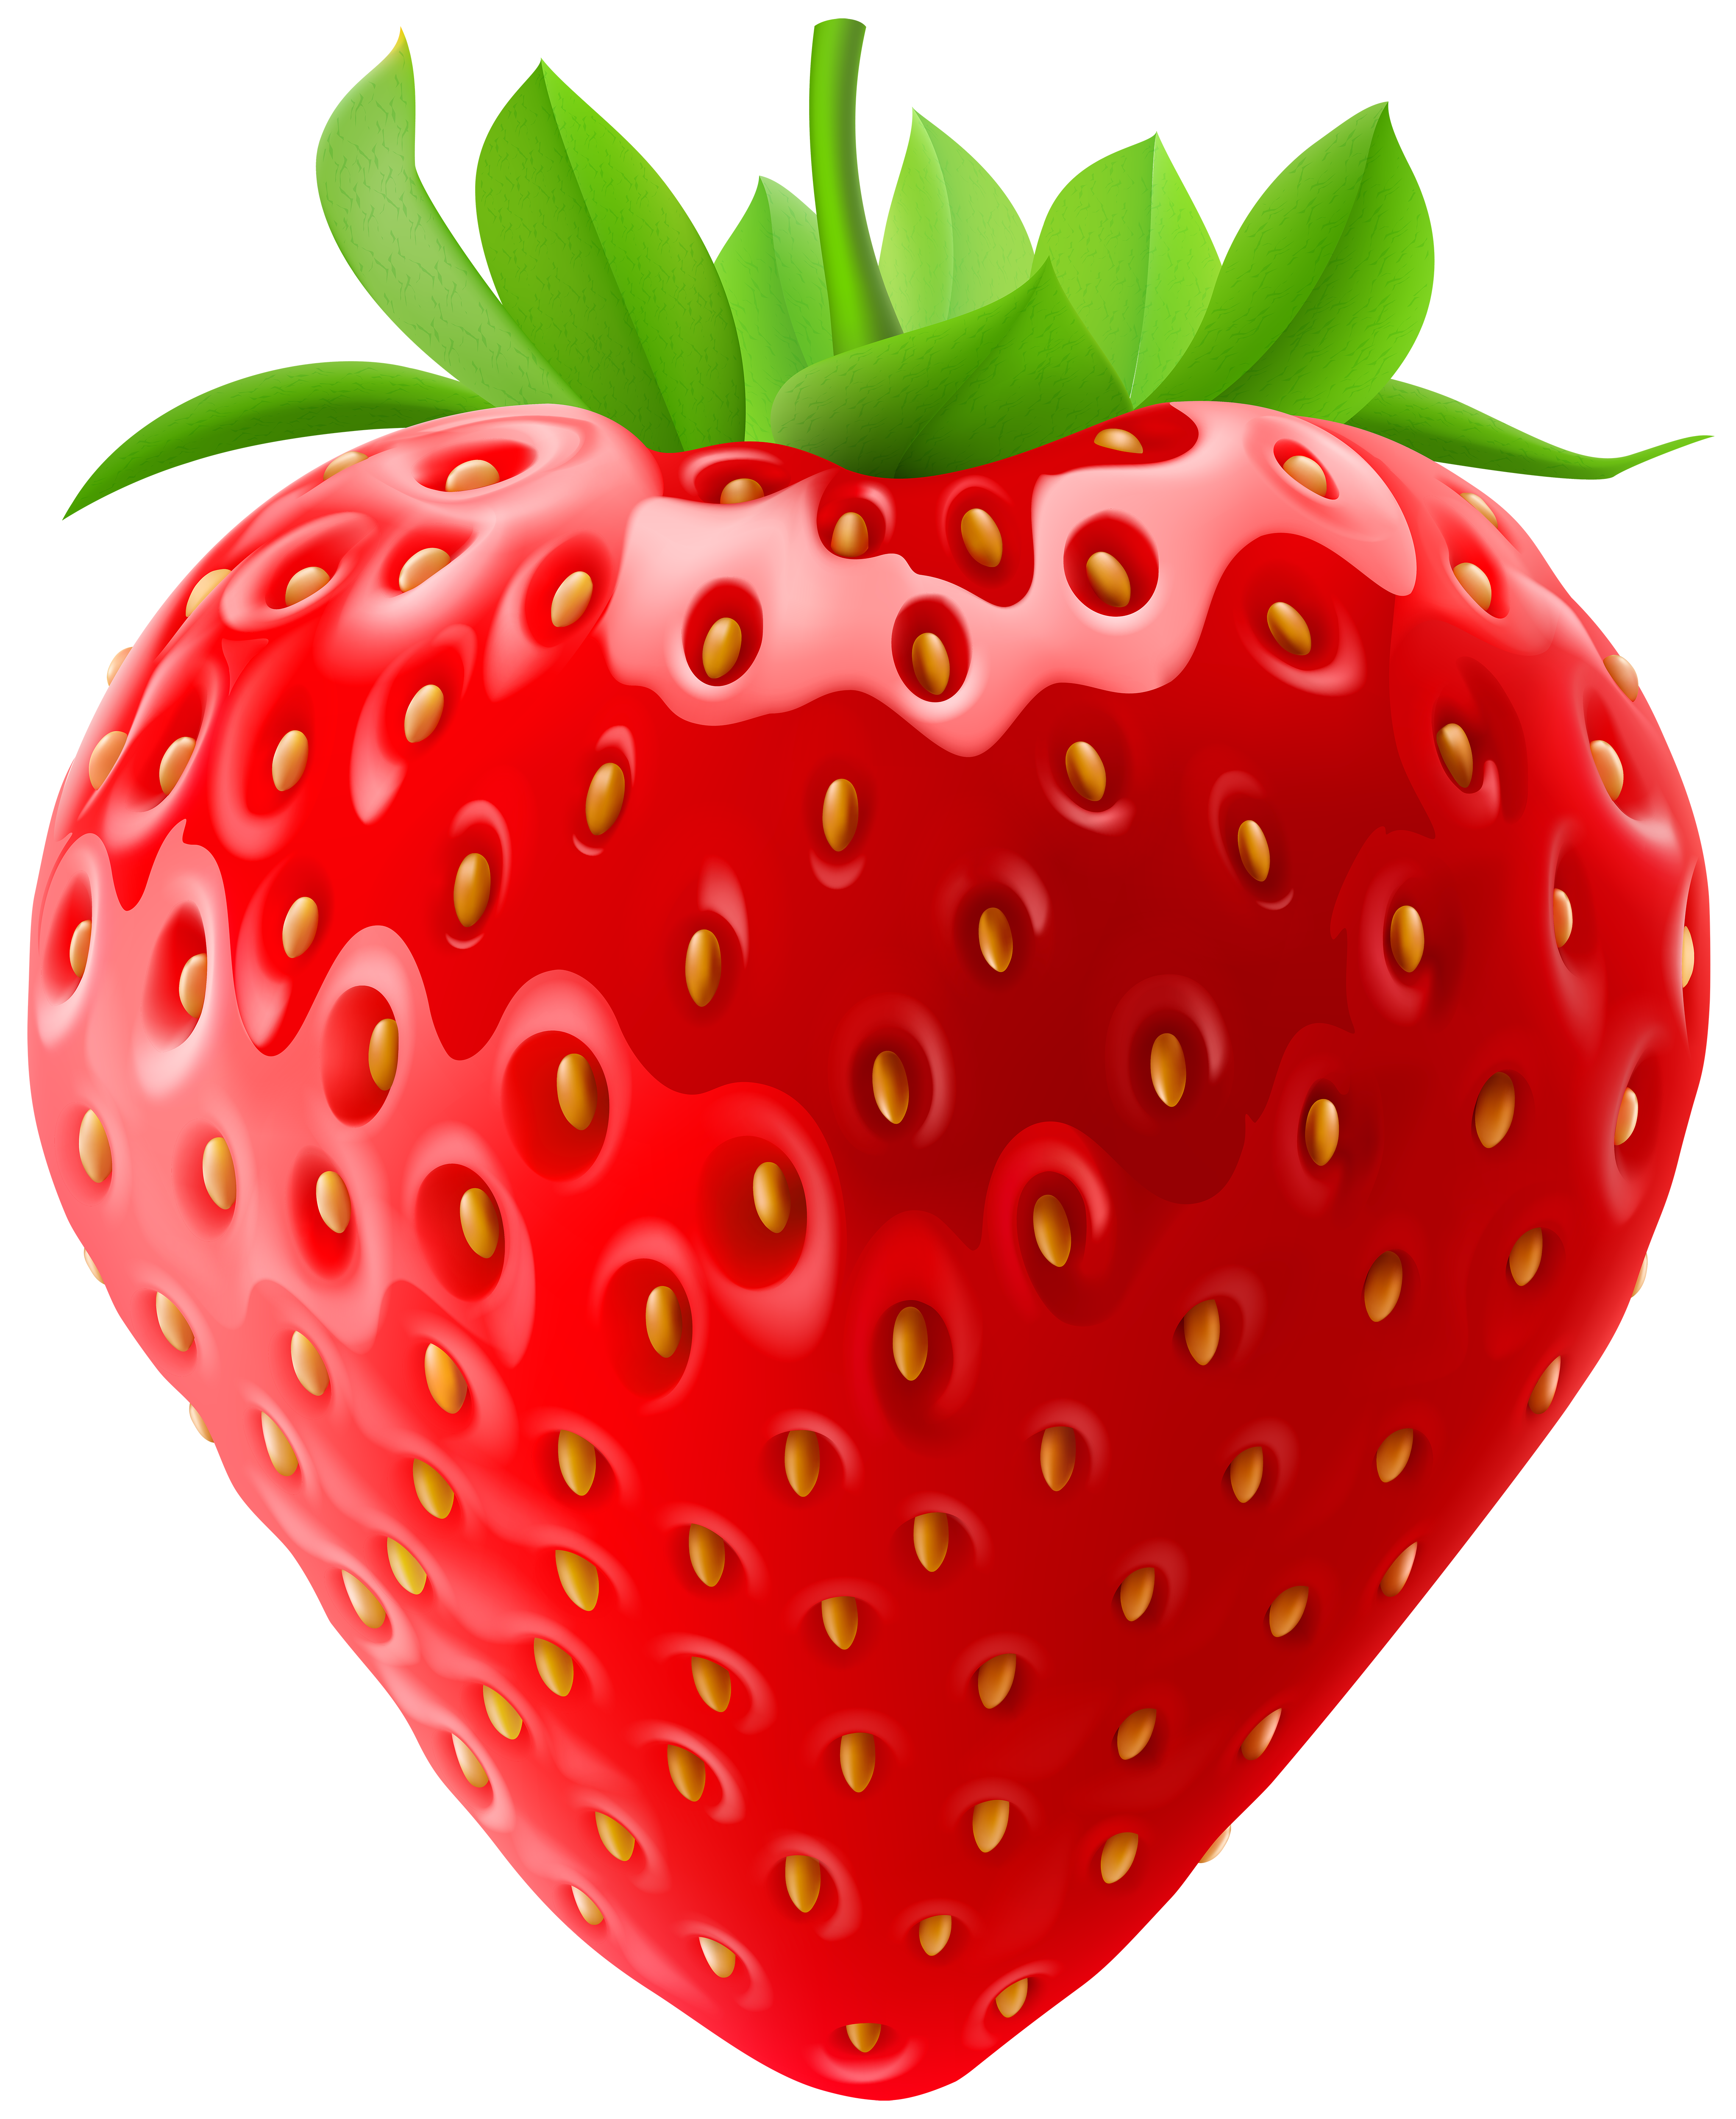 Clip art png image. Clipart food strawberry